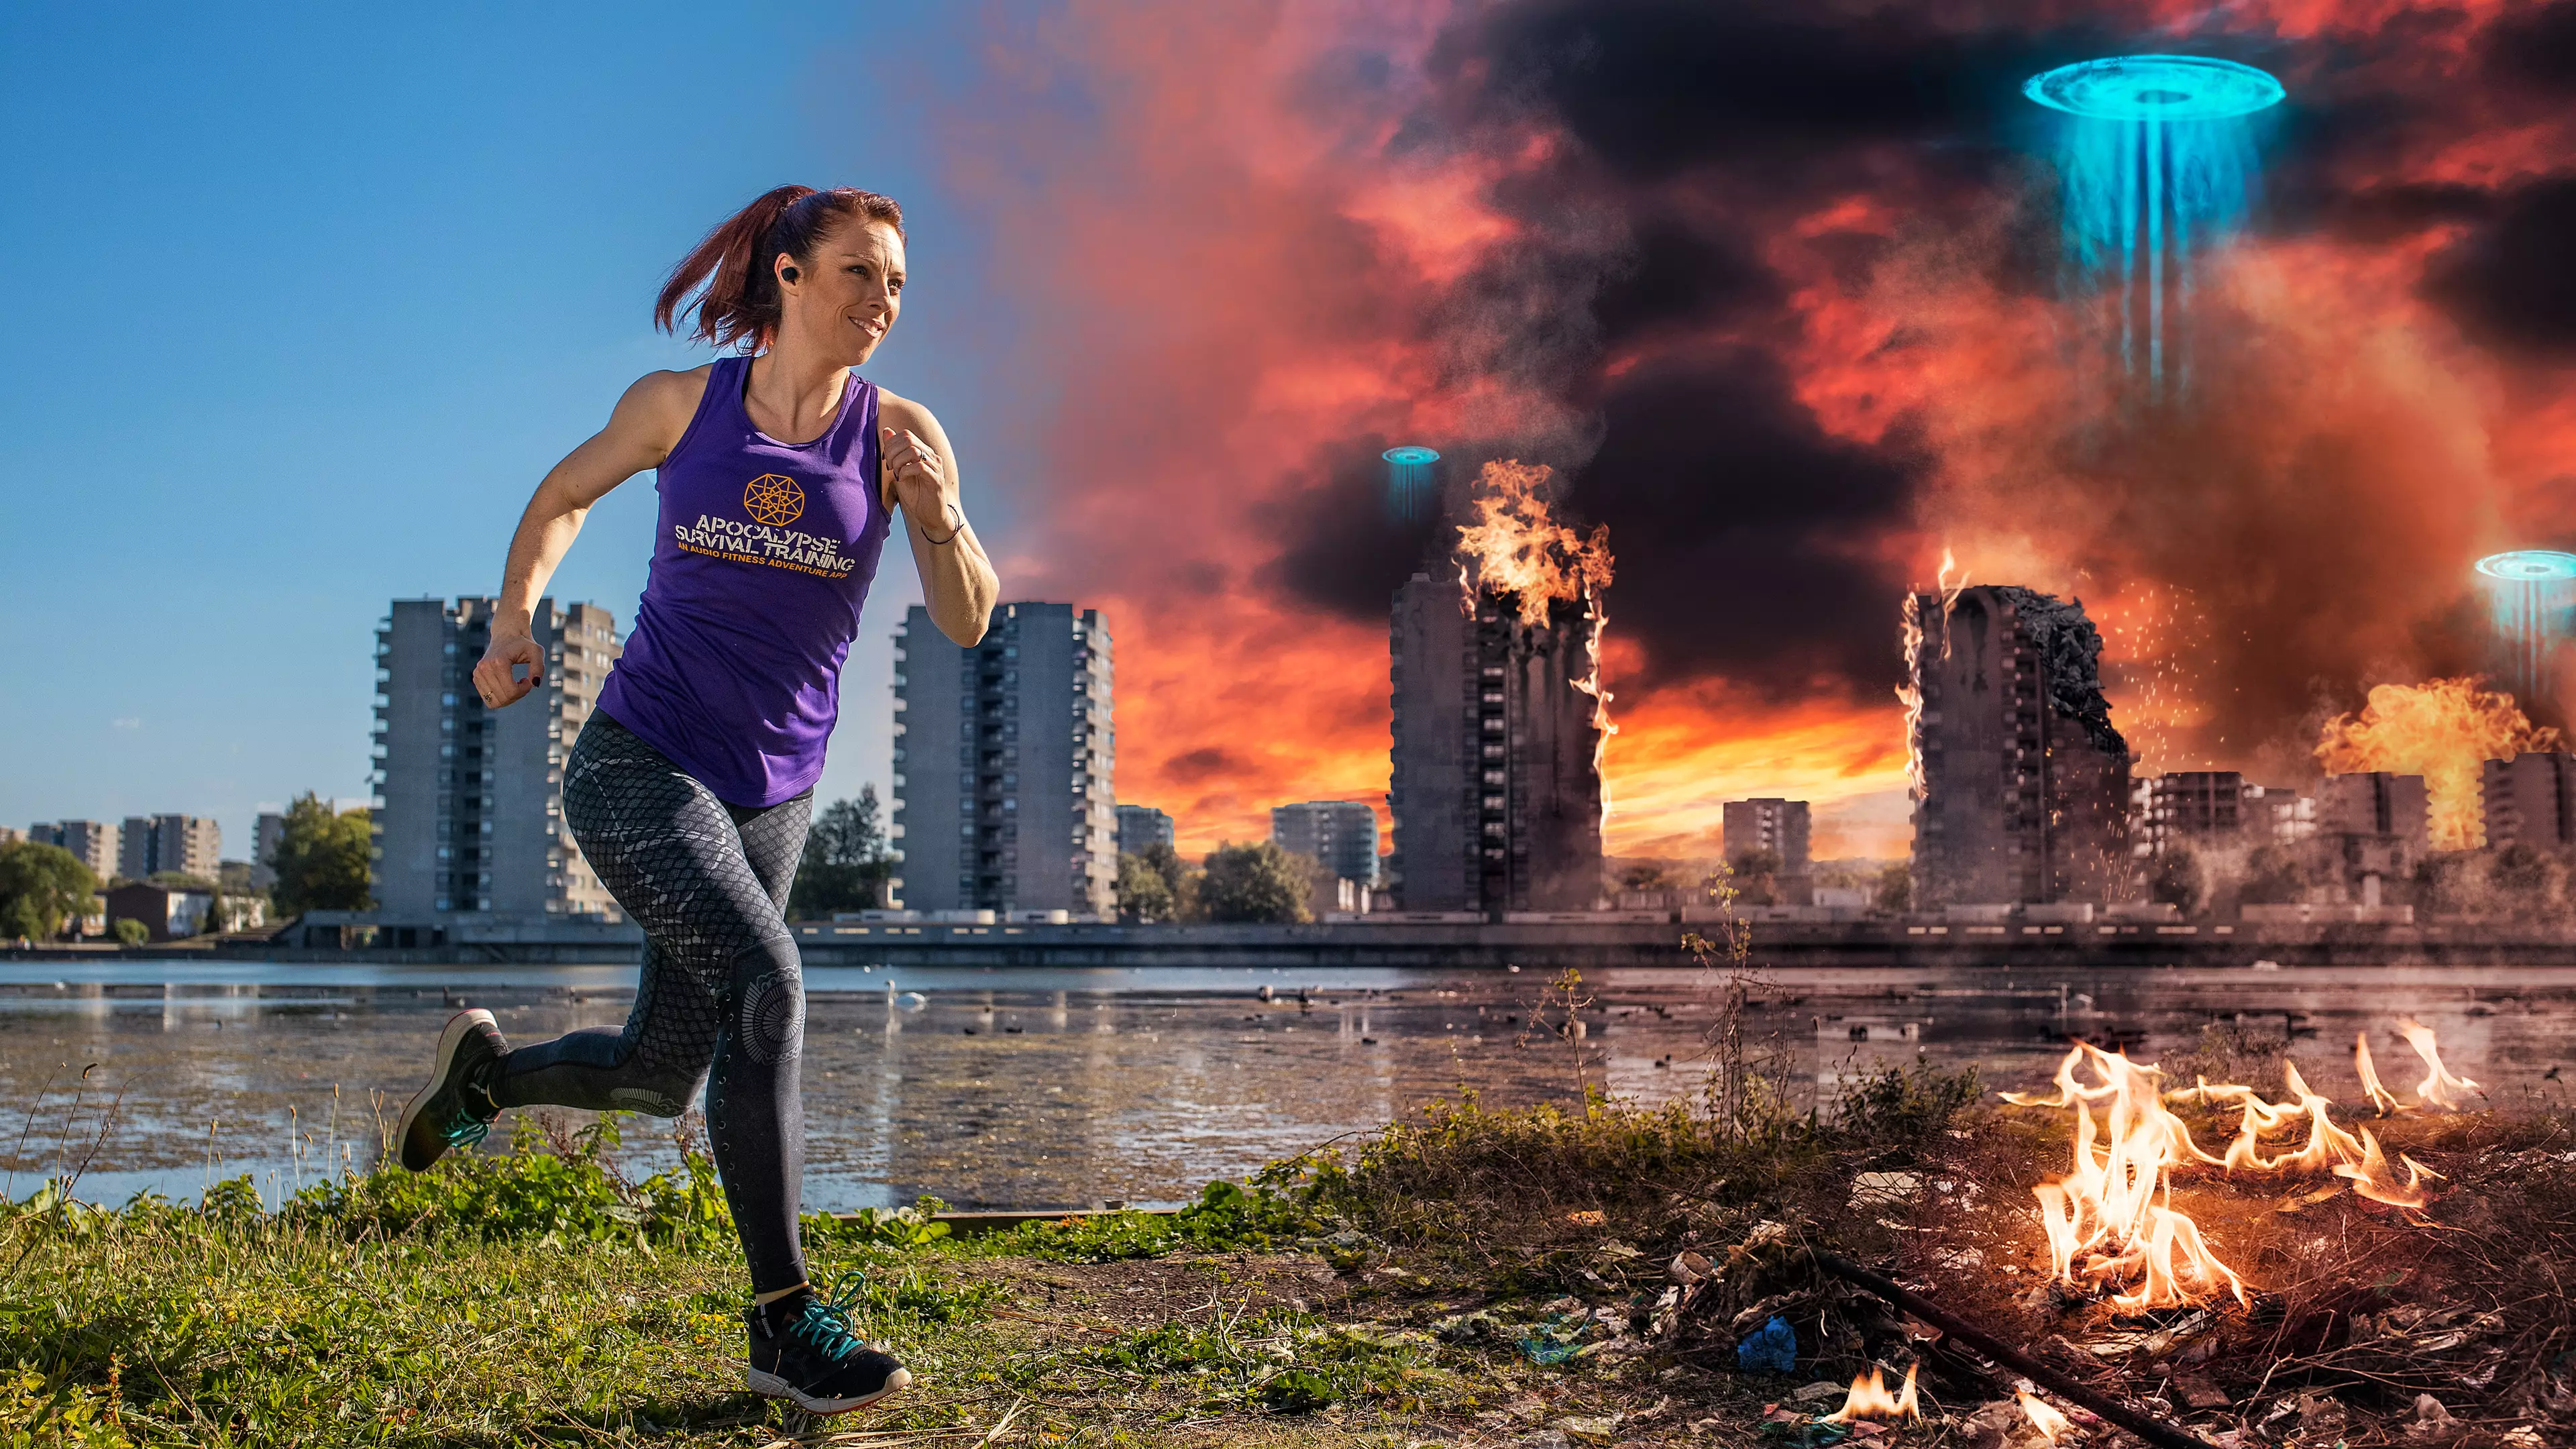 You Can Now Pretend You’re Training For The Apocalypse With New Fitness App